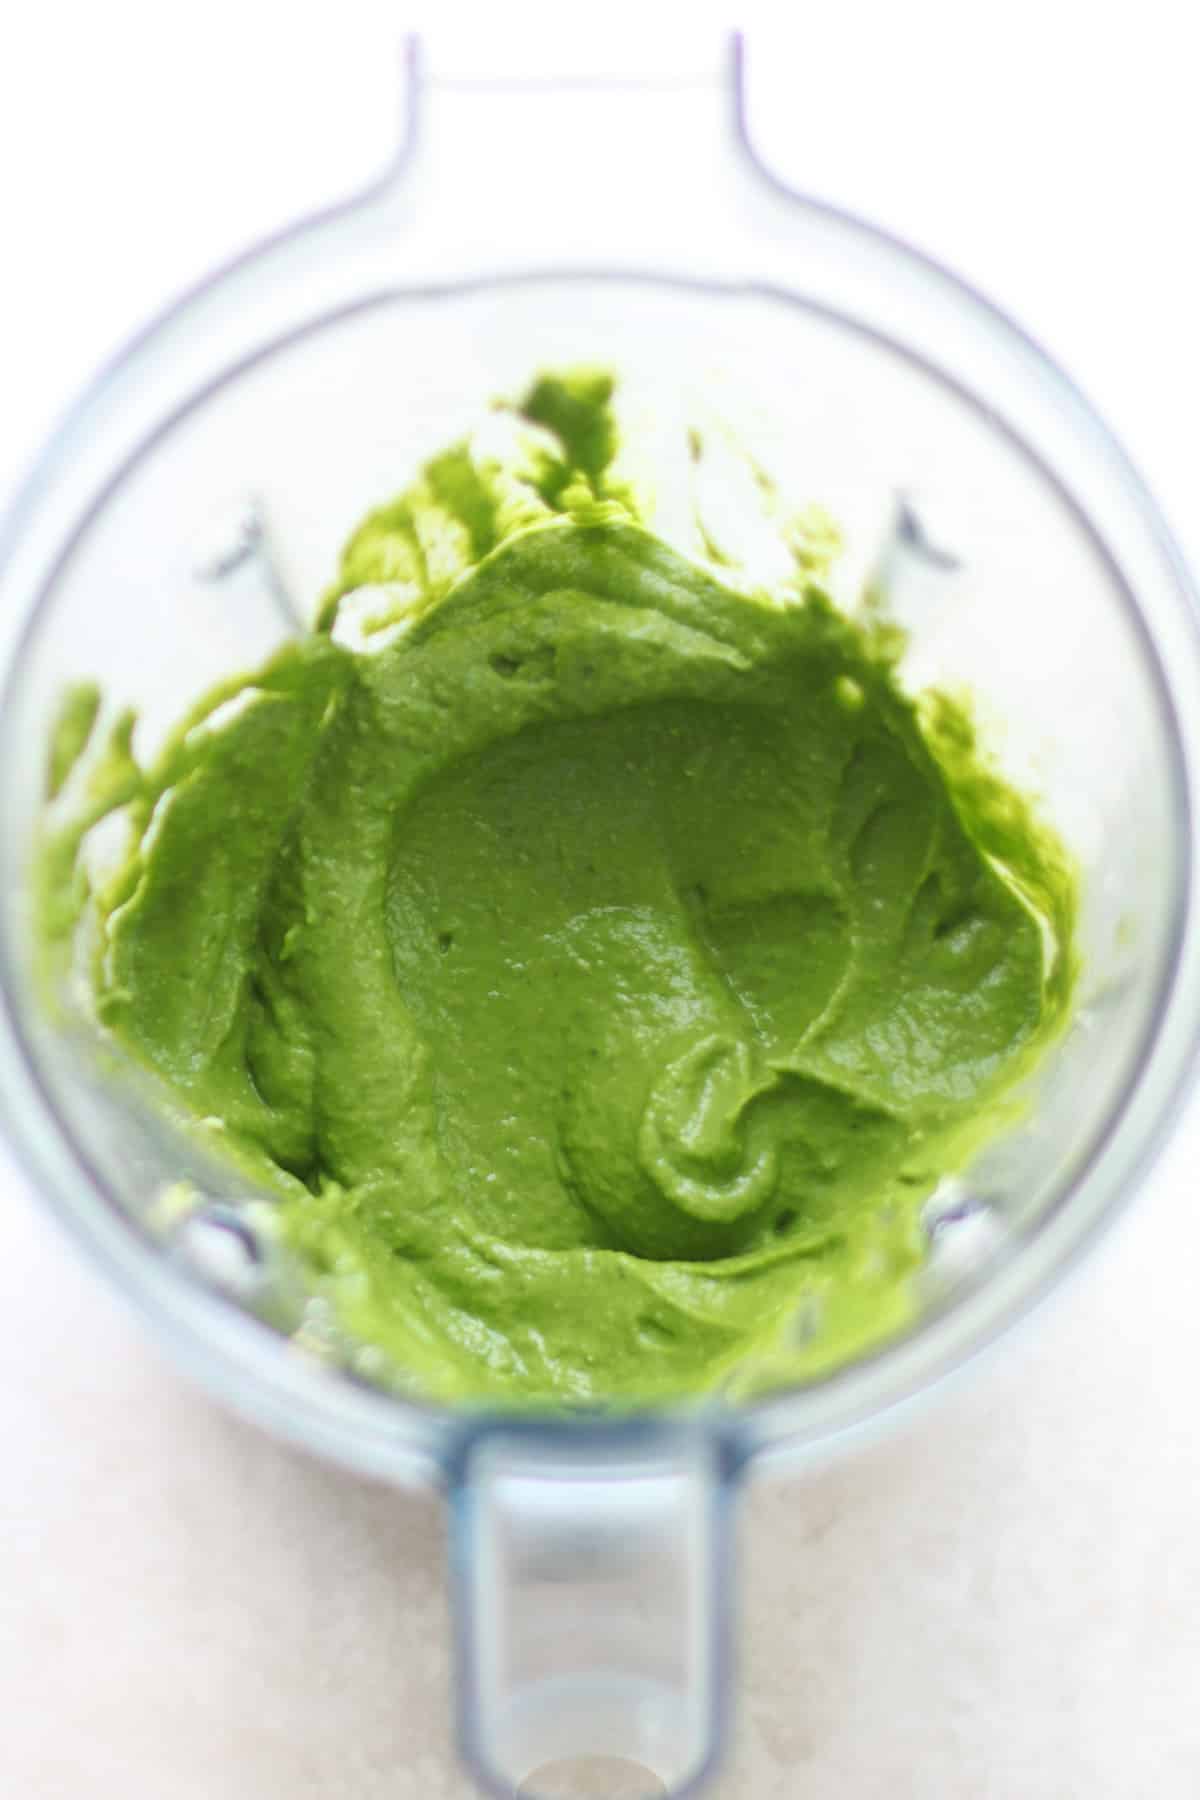 spinach blended in a food processor.